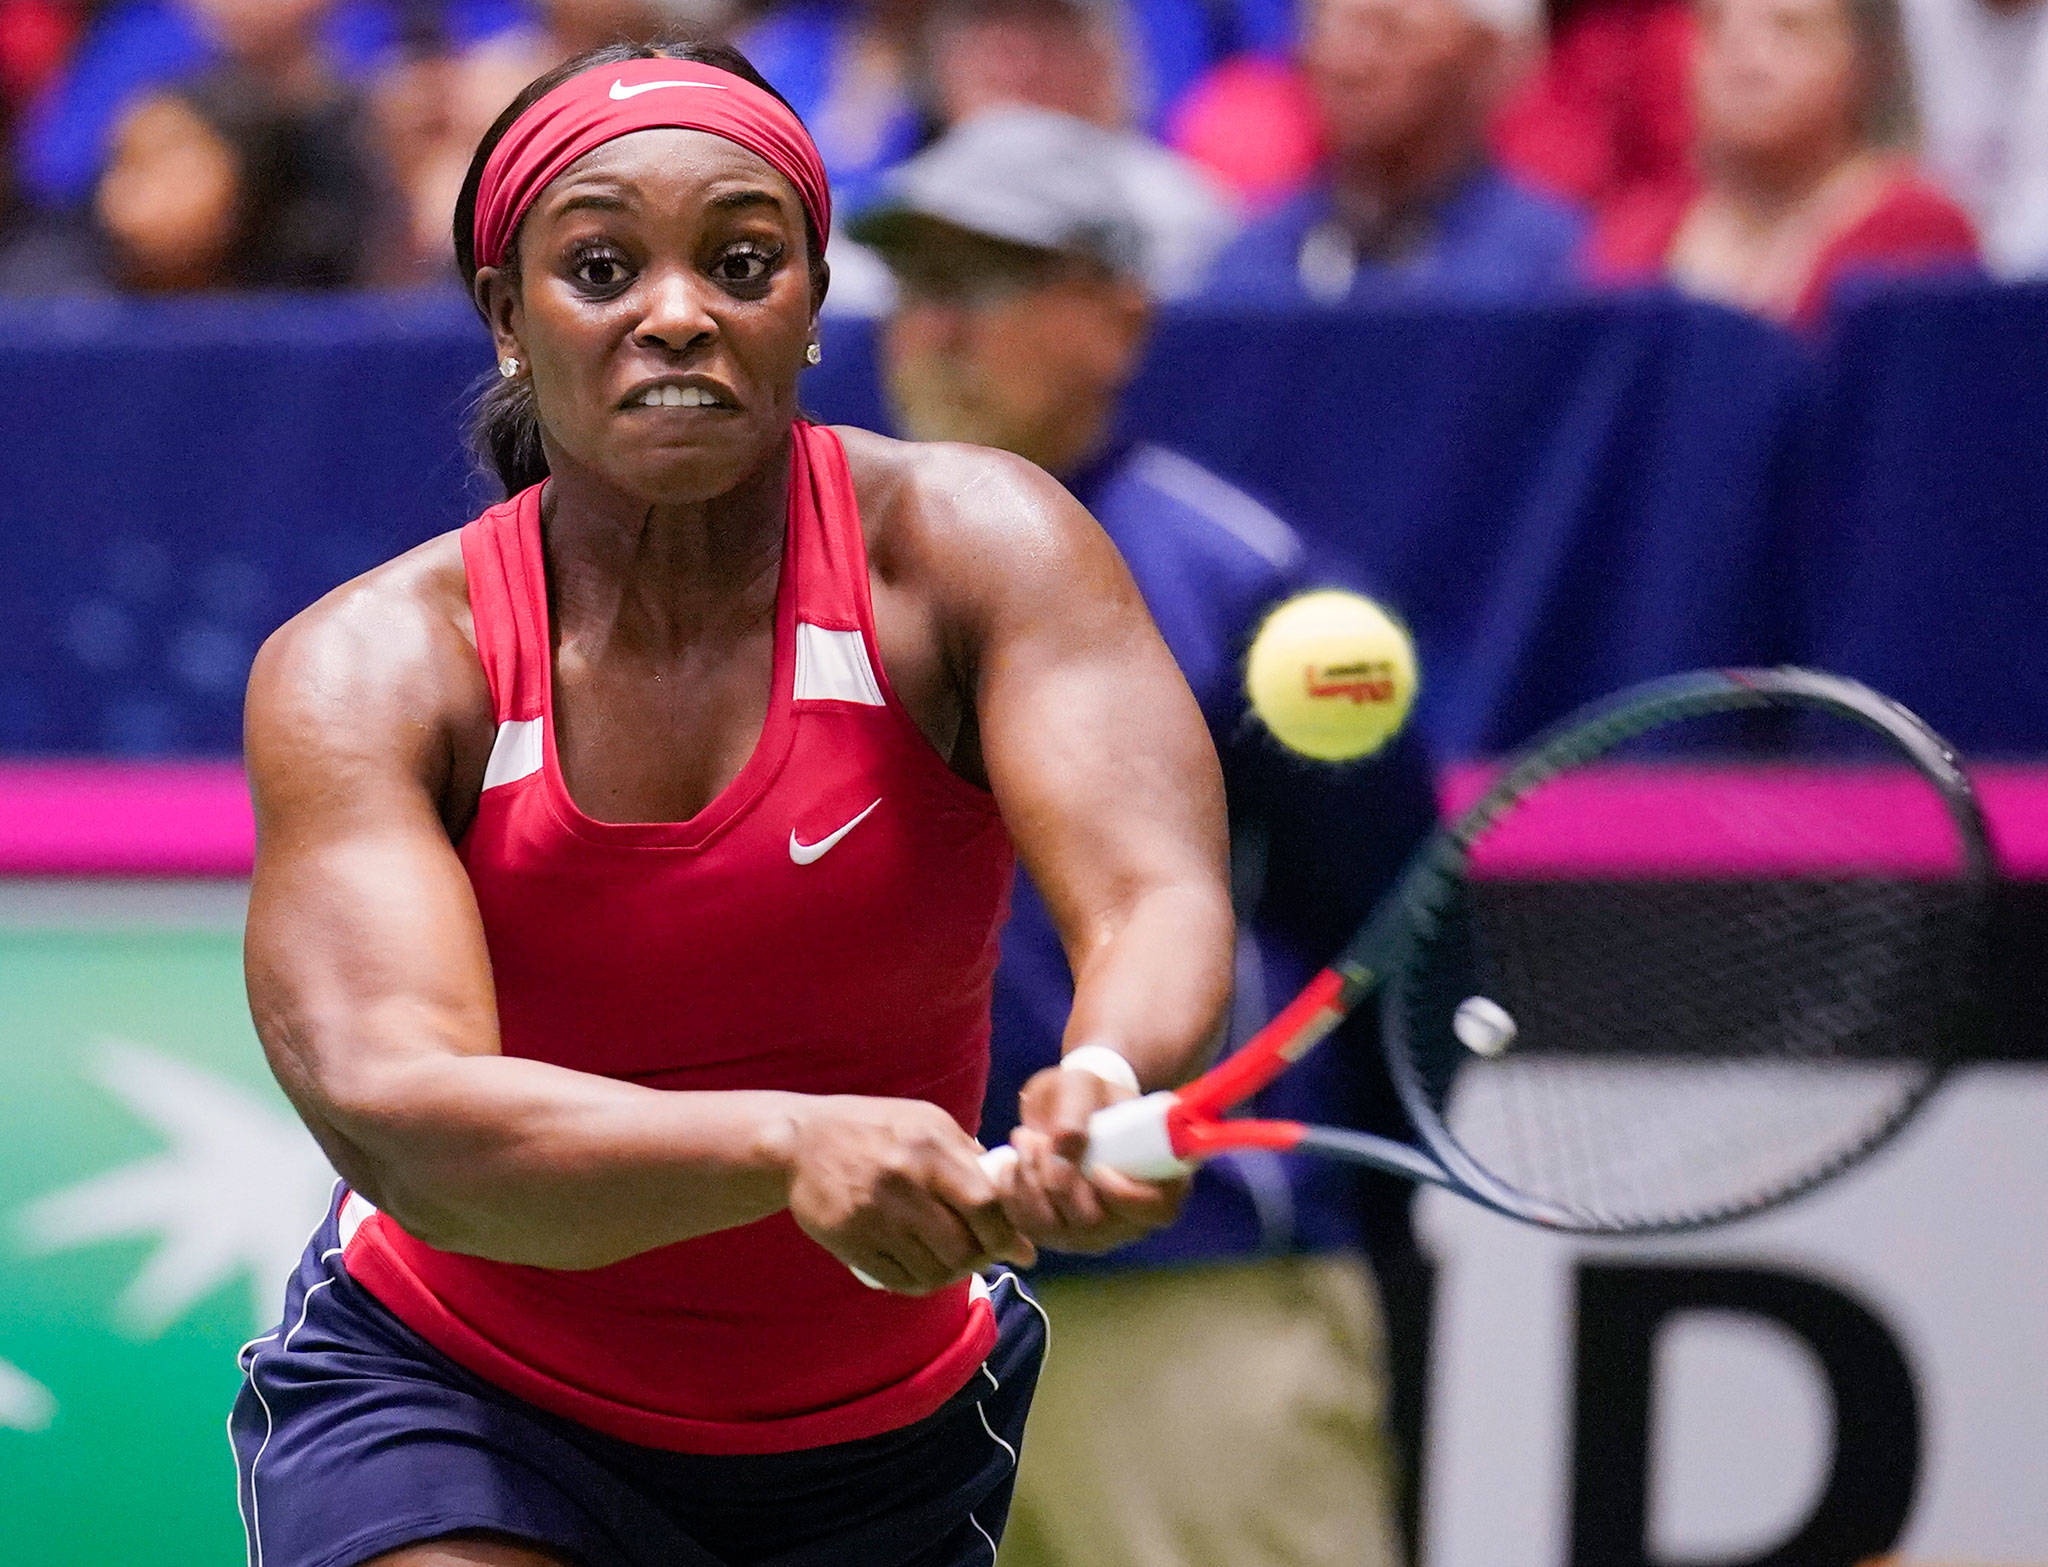 The United States’ Sloane Stephens lines up a return against Switzerland’s Viktorija Golubic during a Fed Cup match April 21, 2019, in San Antonio. (AP Photo/Darren Abate)